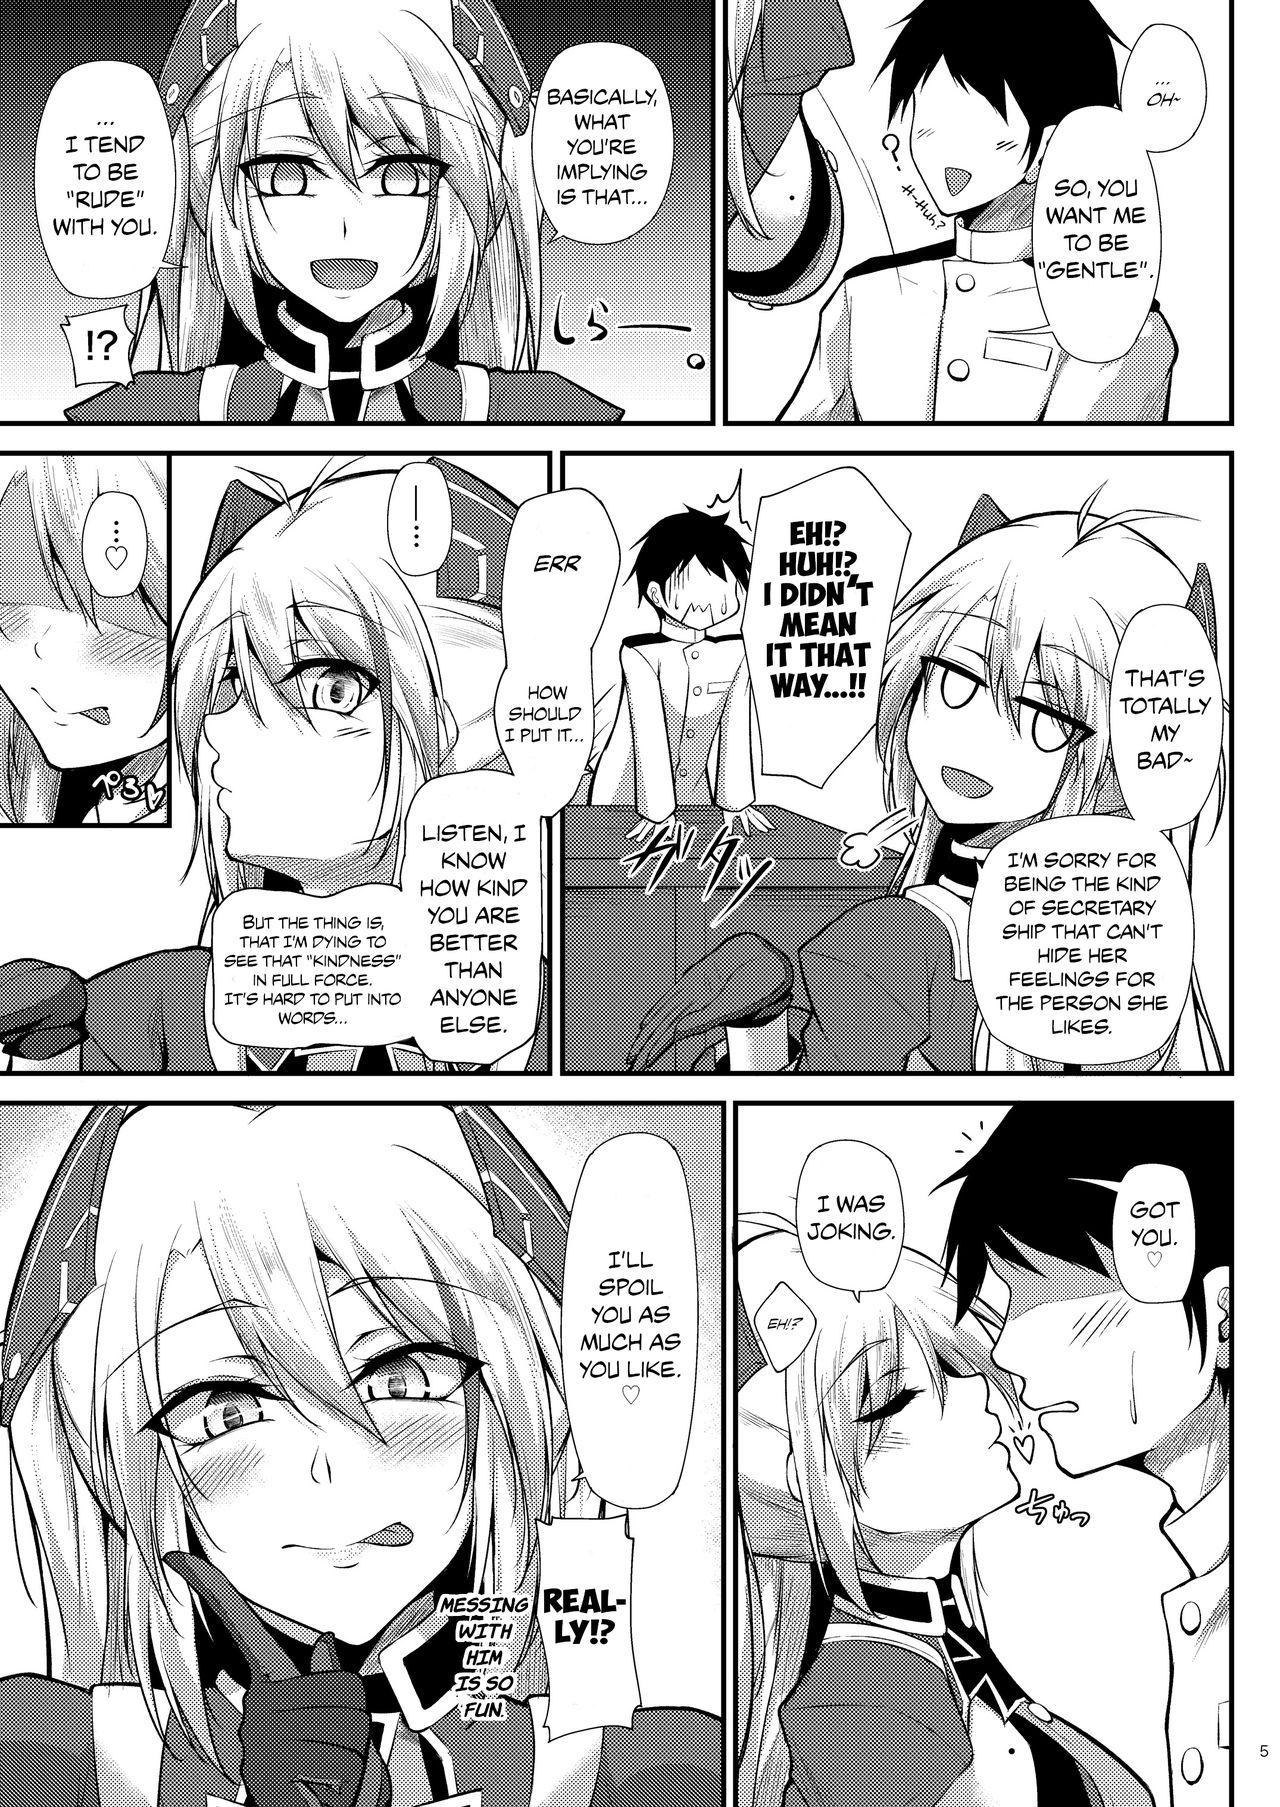 Naturaltits Prinz Eugen ni Amaetai!! | I Want to be Spoiled by Prinz Eugen!! - Azur lane Perfect - Page 5